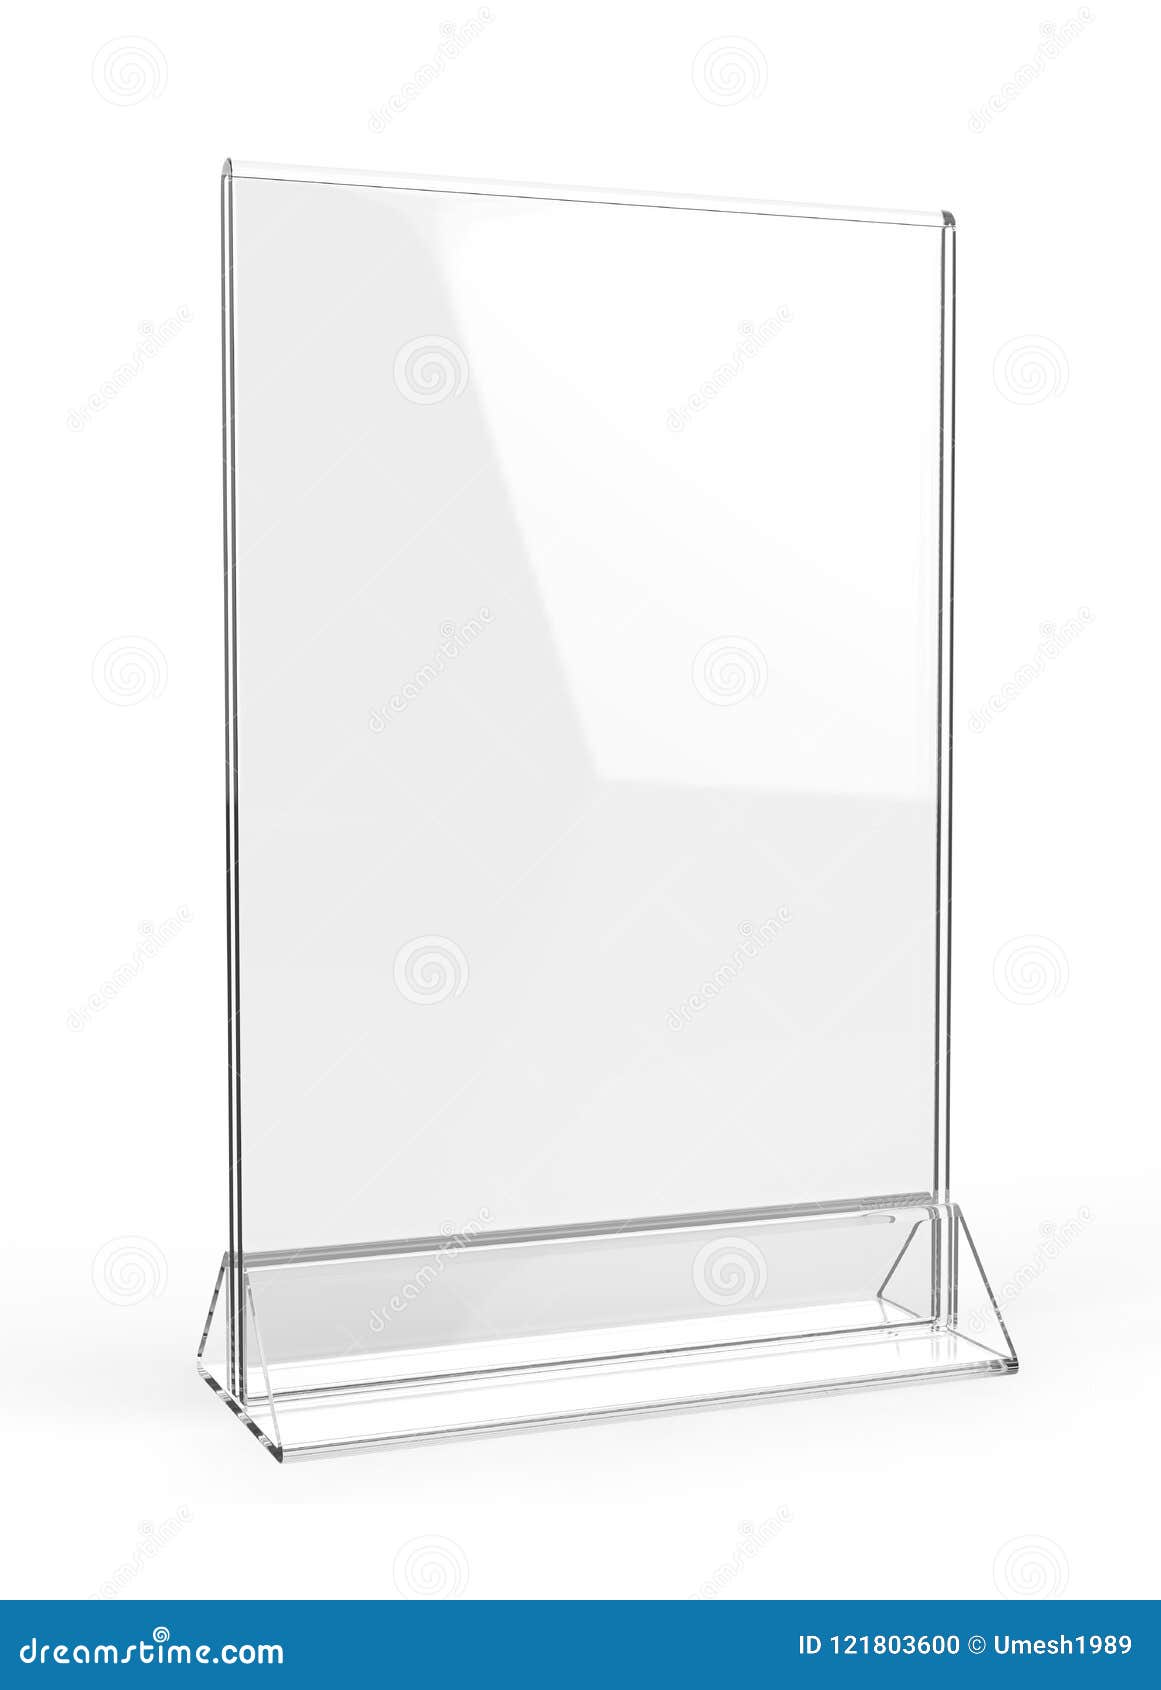 Sign Print Menu Graphic Holders Acrylic Perspex Plastic Stands A3 A4 A5 A6 DL 